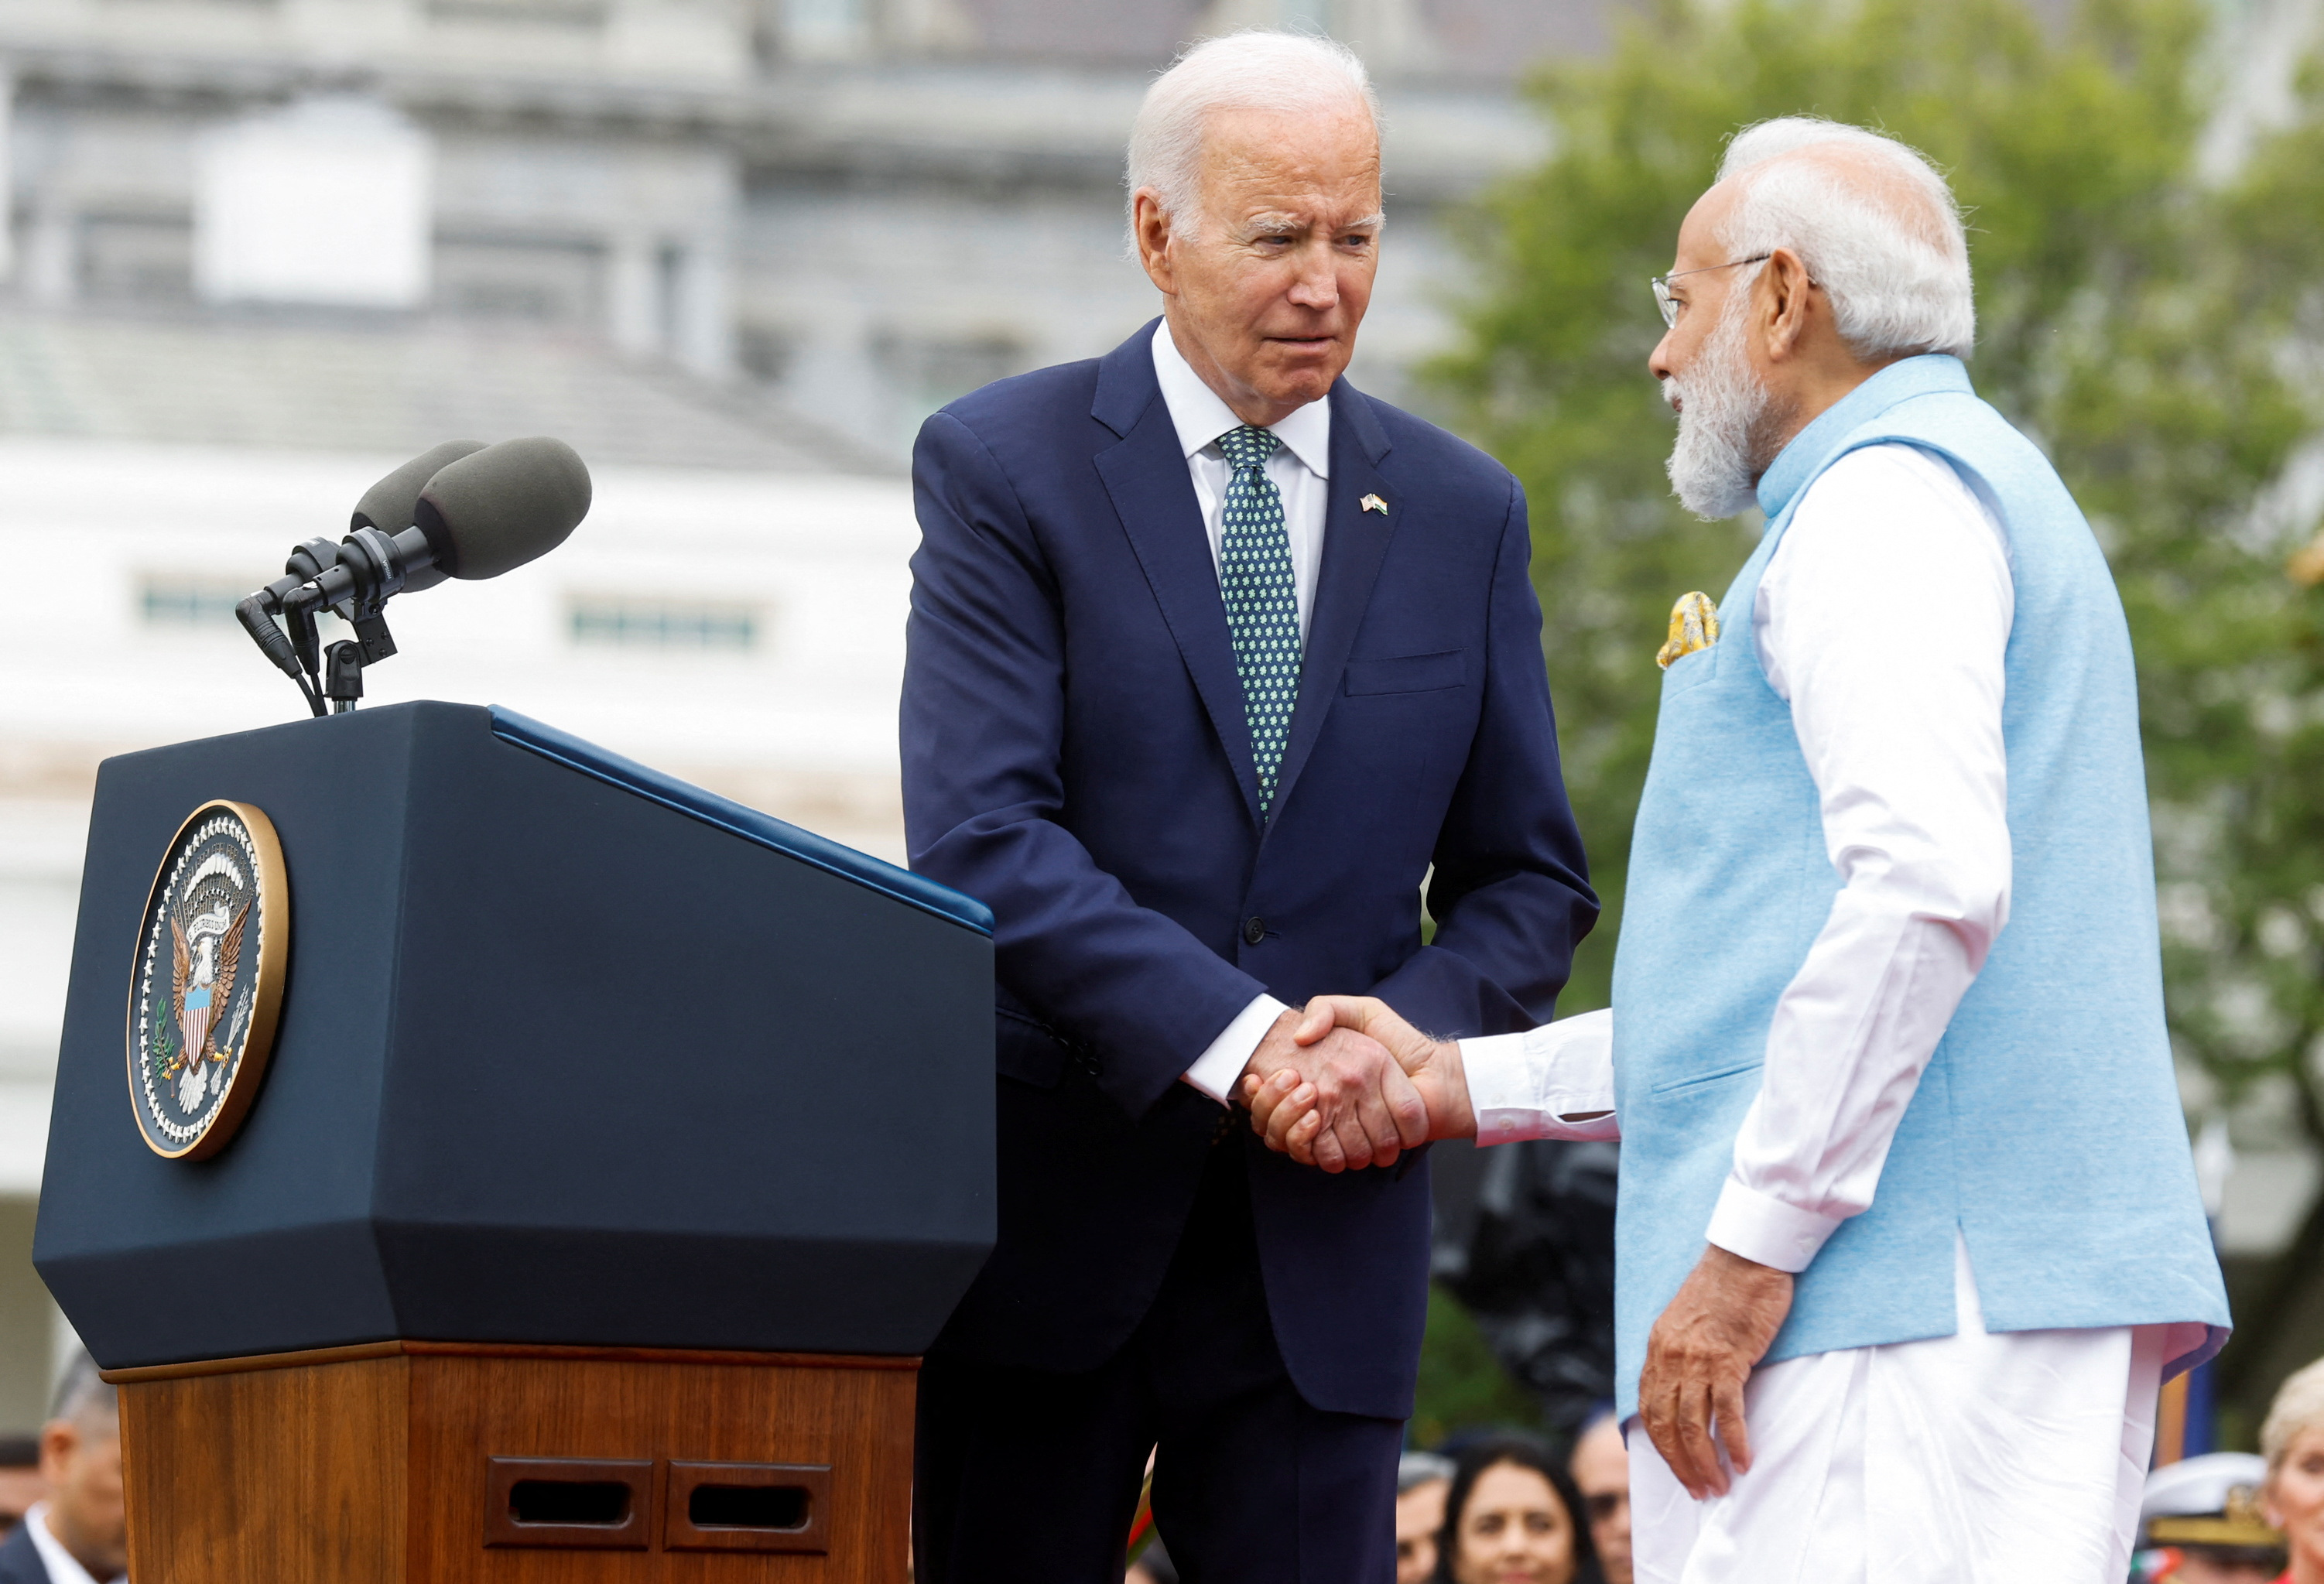 US President Joe Biden shakes hands with India’s Prime Minister Narendra Modi after introducing Modi during an official State Arrival Ceremony held at the start of Modi's visit to the White House in Washington DC, on Thursday.